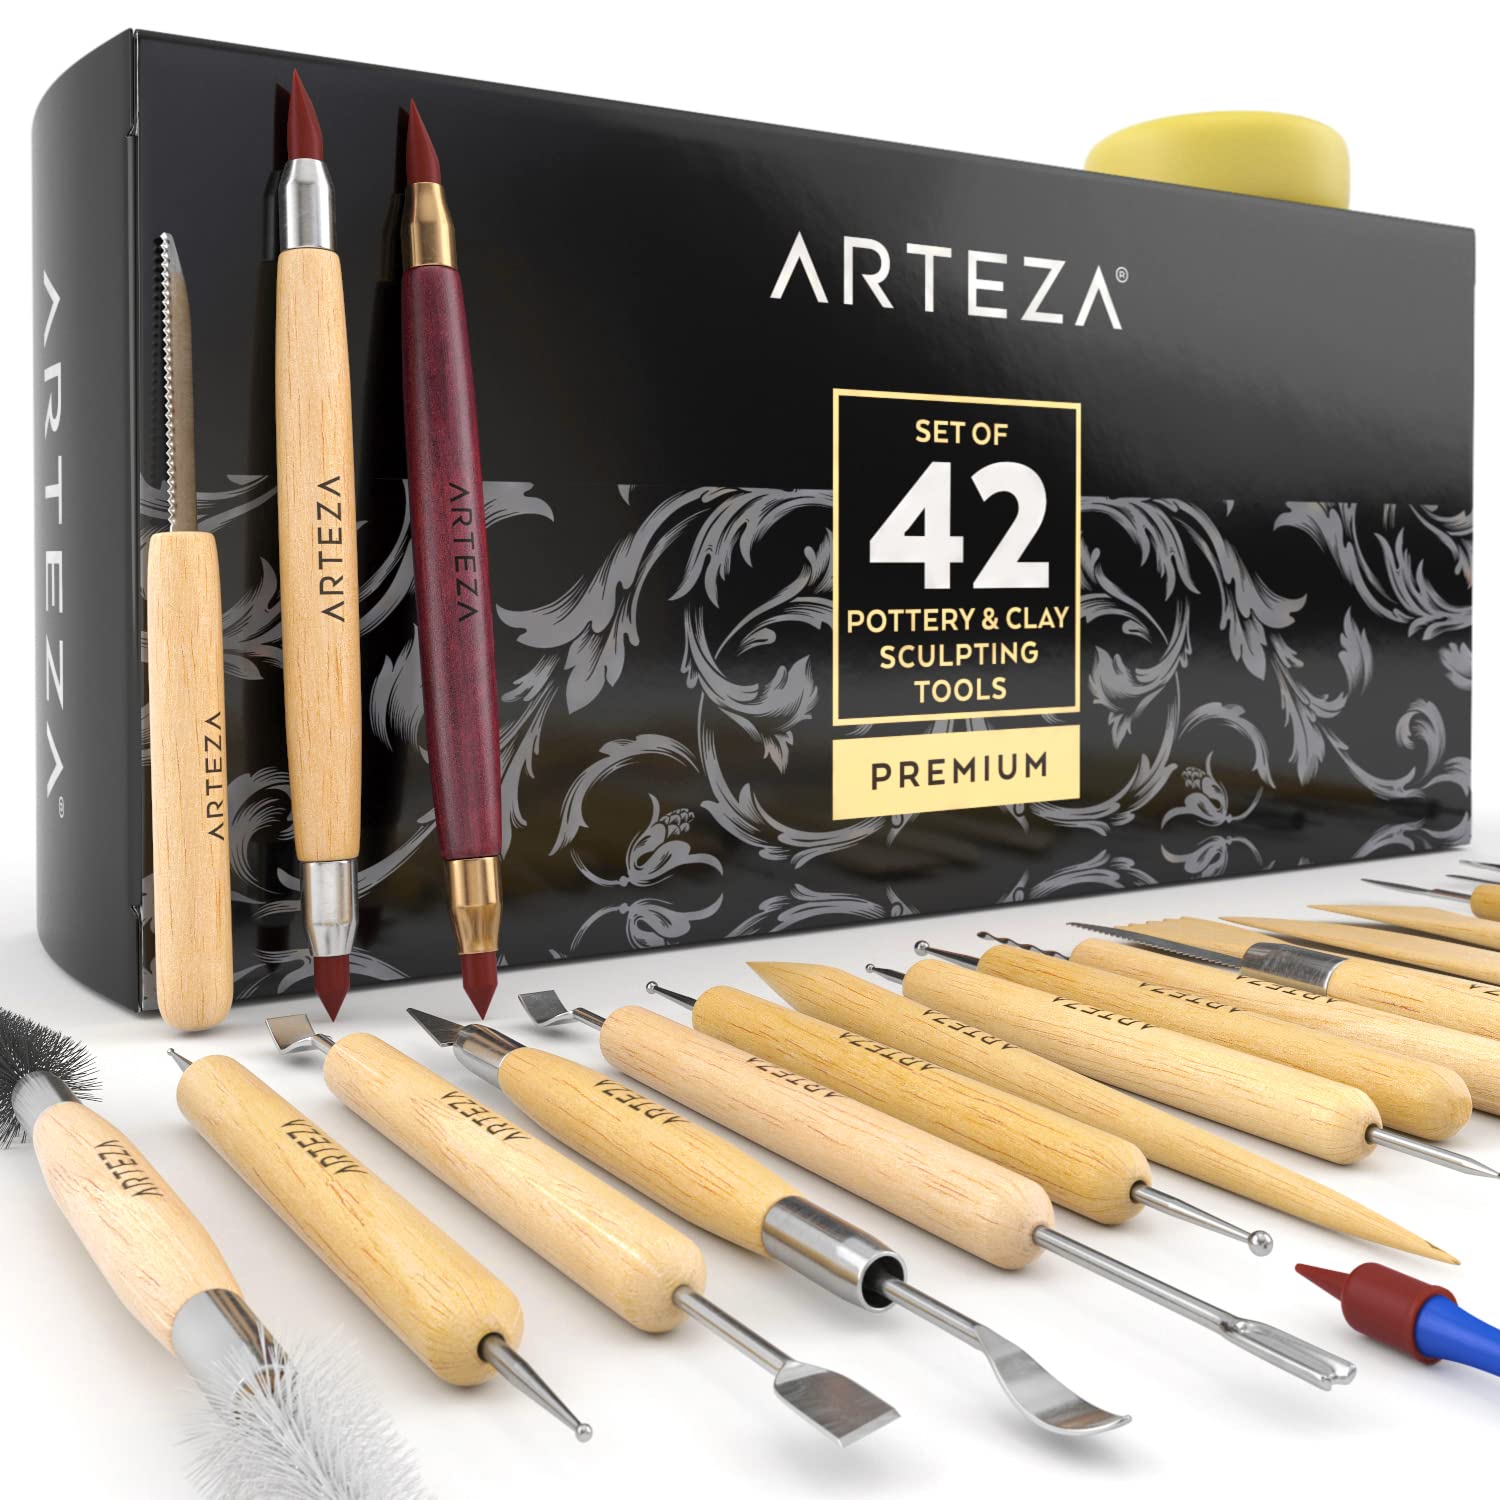 ARTEZA Pottery & Polymer Clay Tools 42-Piece Sculpting Set Steel Tip Tools  with Wooden Handles for Pottery Modeling Smoothing Carving & Ceramics Set  of 42